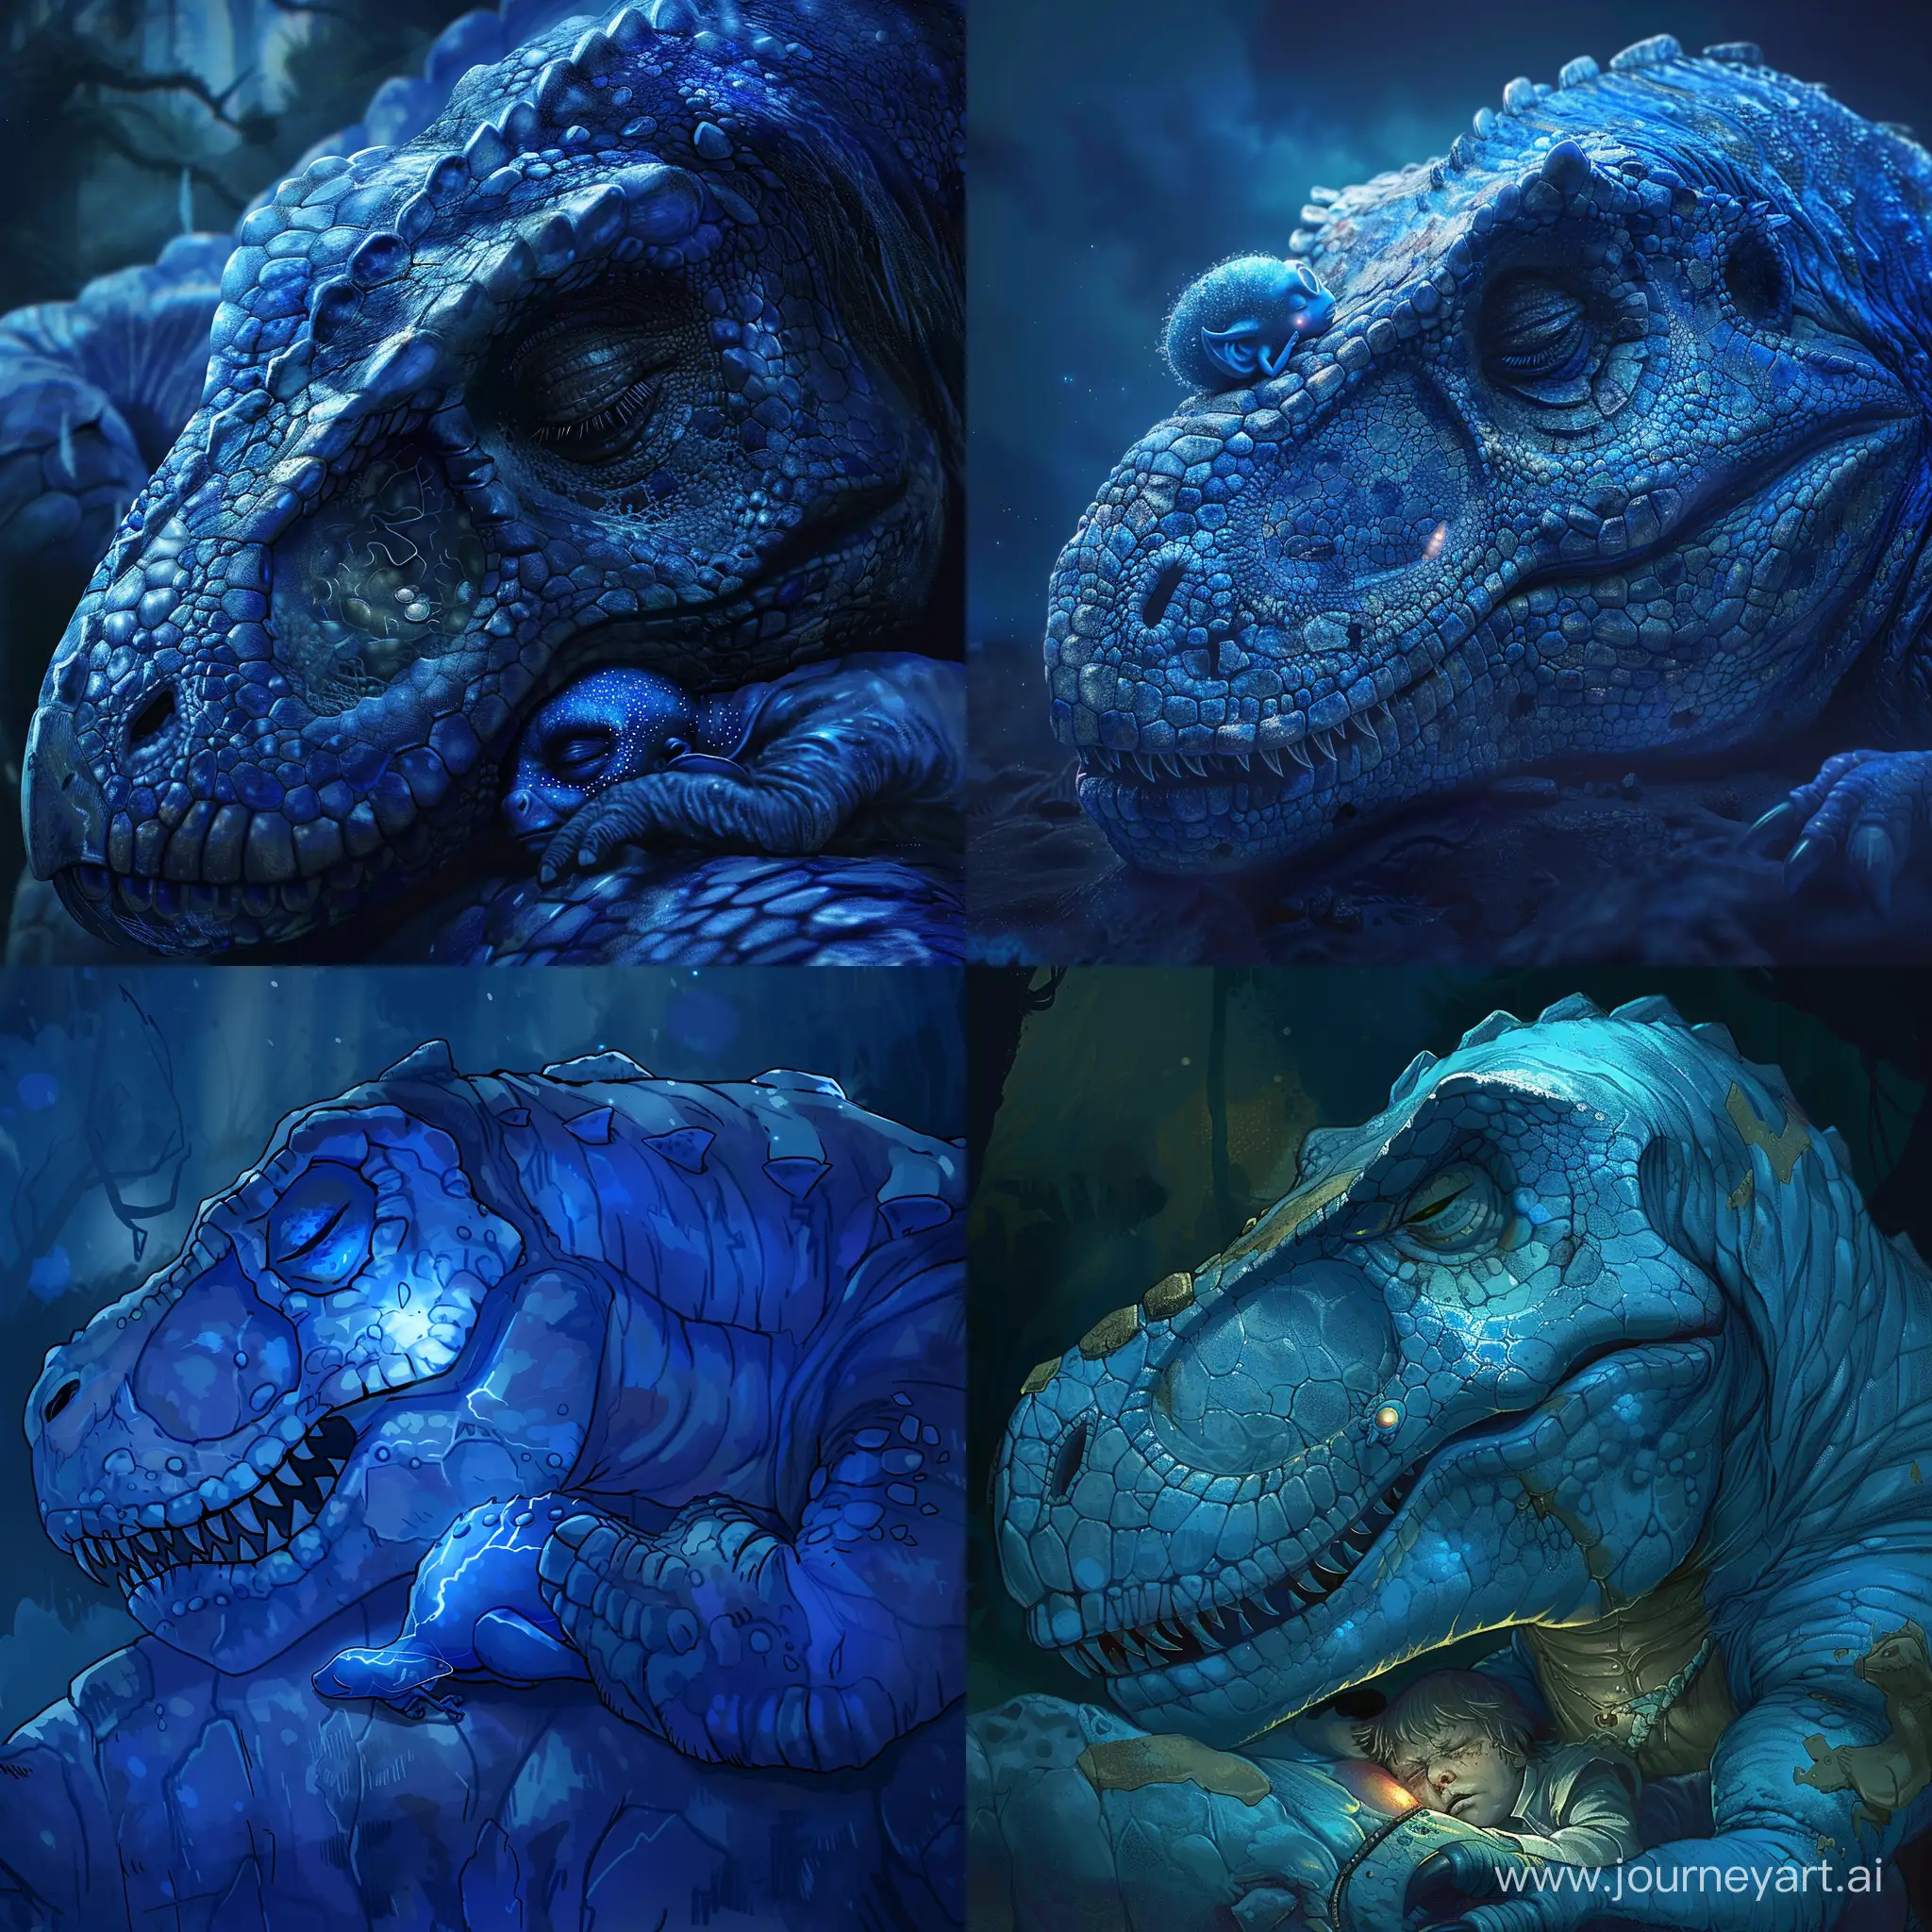 a tiny blue alien sleeping on the giant blue t-rex's chest and hears a heartbeat.